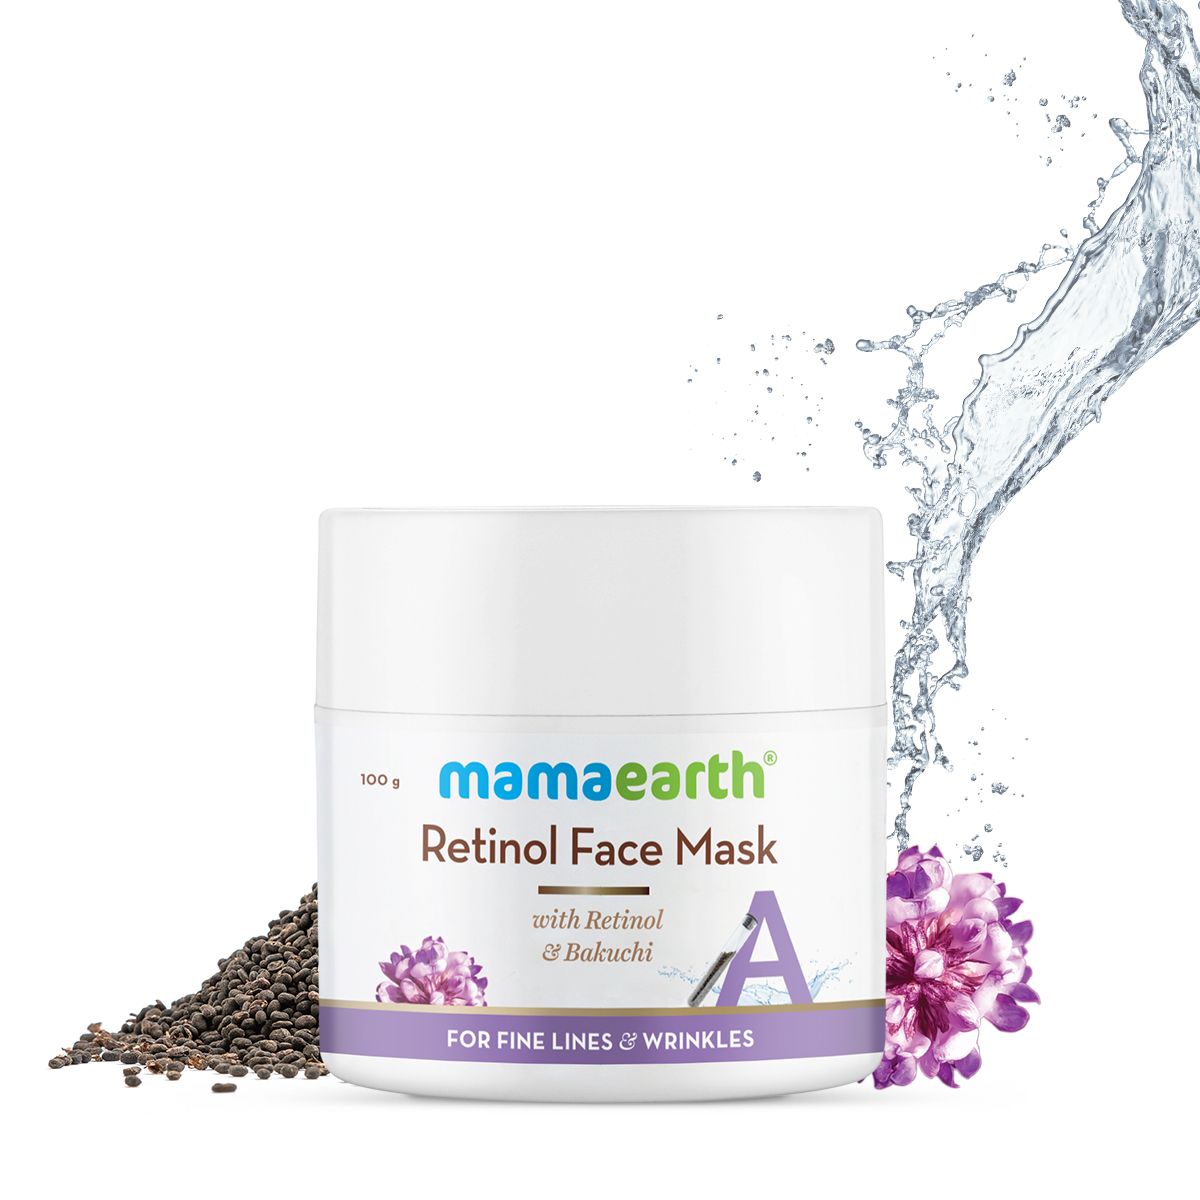 Why Is Mamaearth Retinol Face Mask Better Than Others Available In The Market?